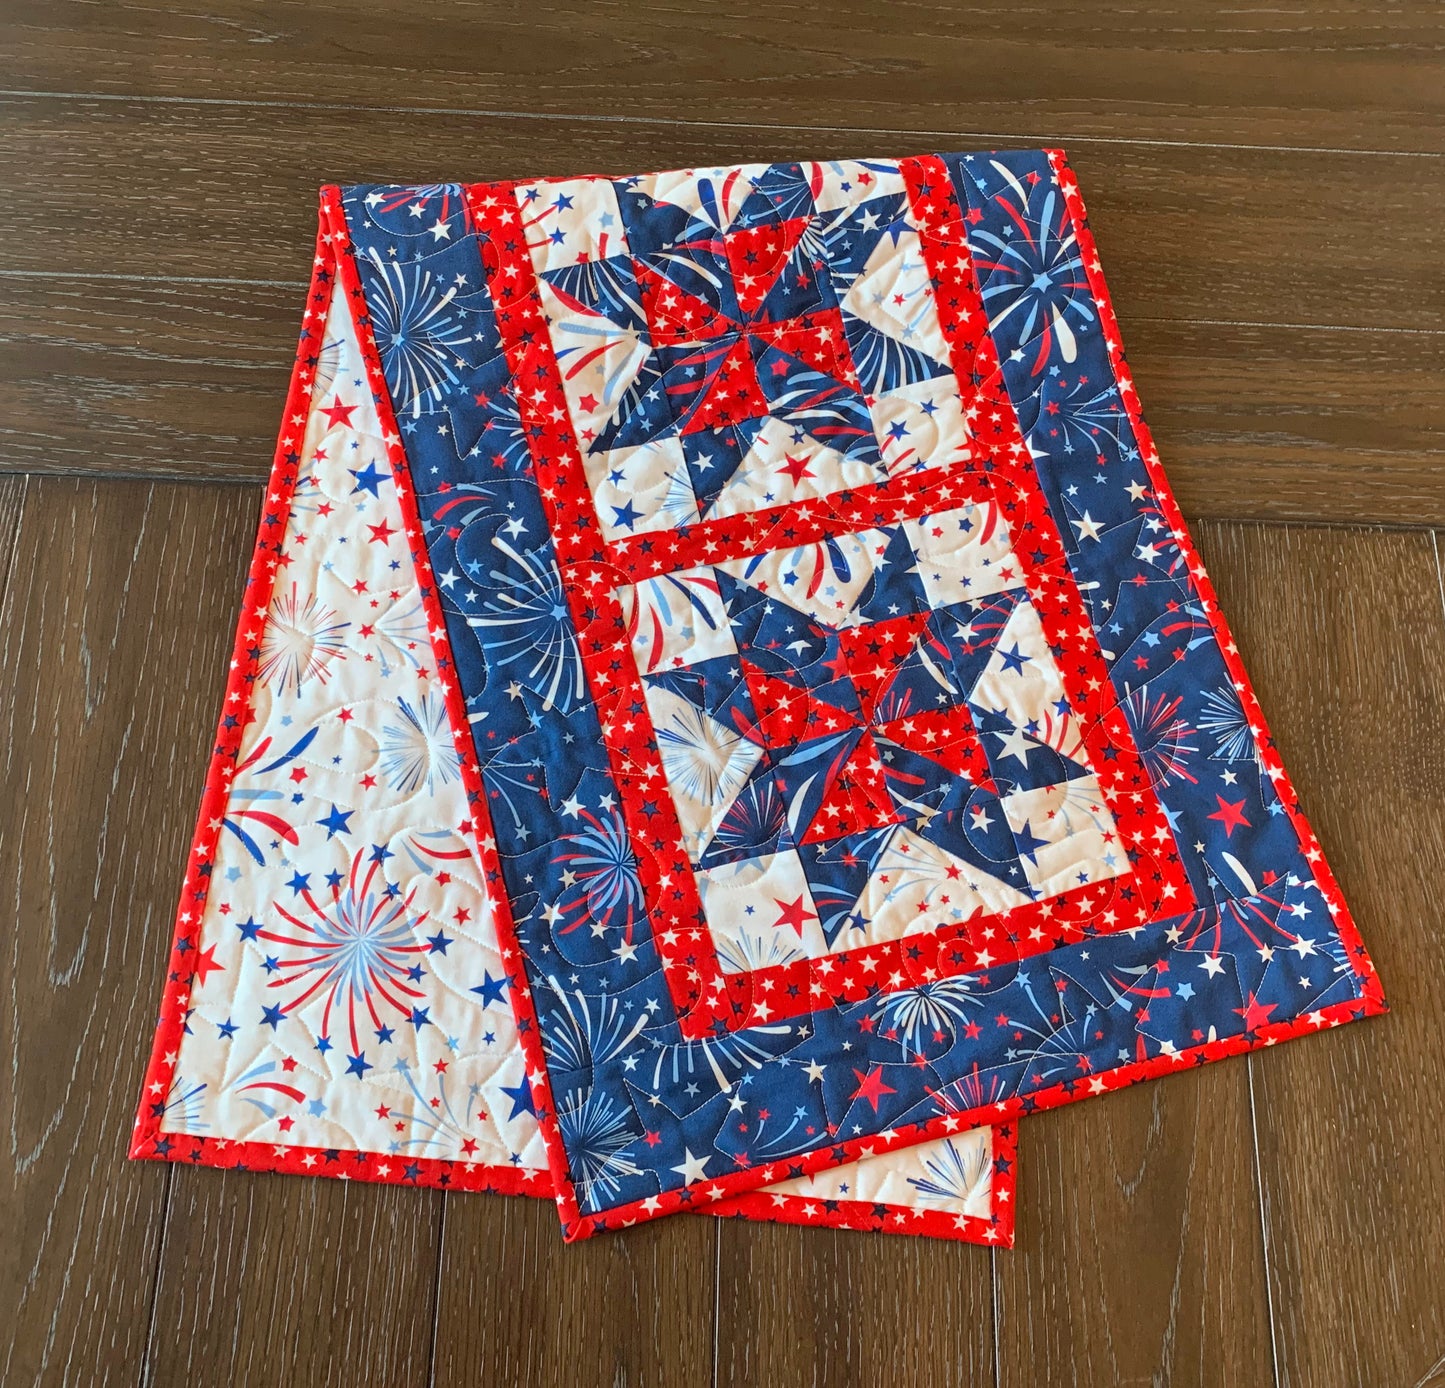 Red white and blue patriotic table runner with four center star blocks that have a pinwheel in the center. The runner has red star sashing between the blocks and a blue fireworks border. Runner is shown folded on a table.